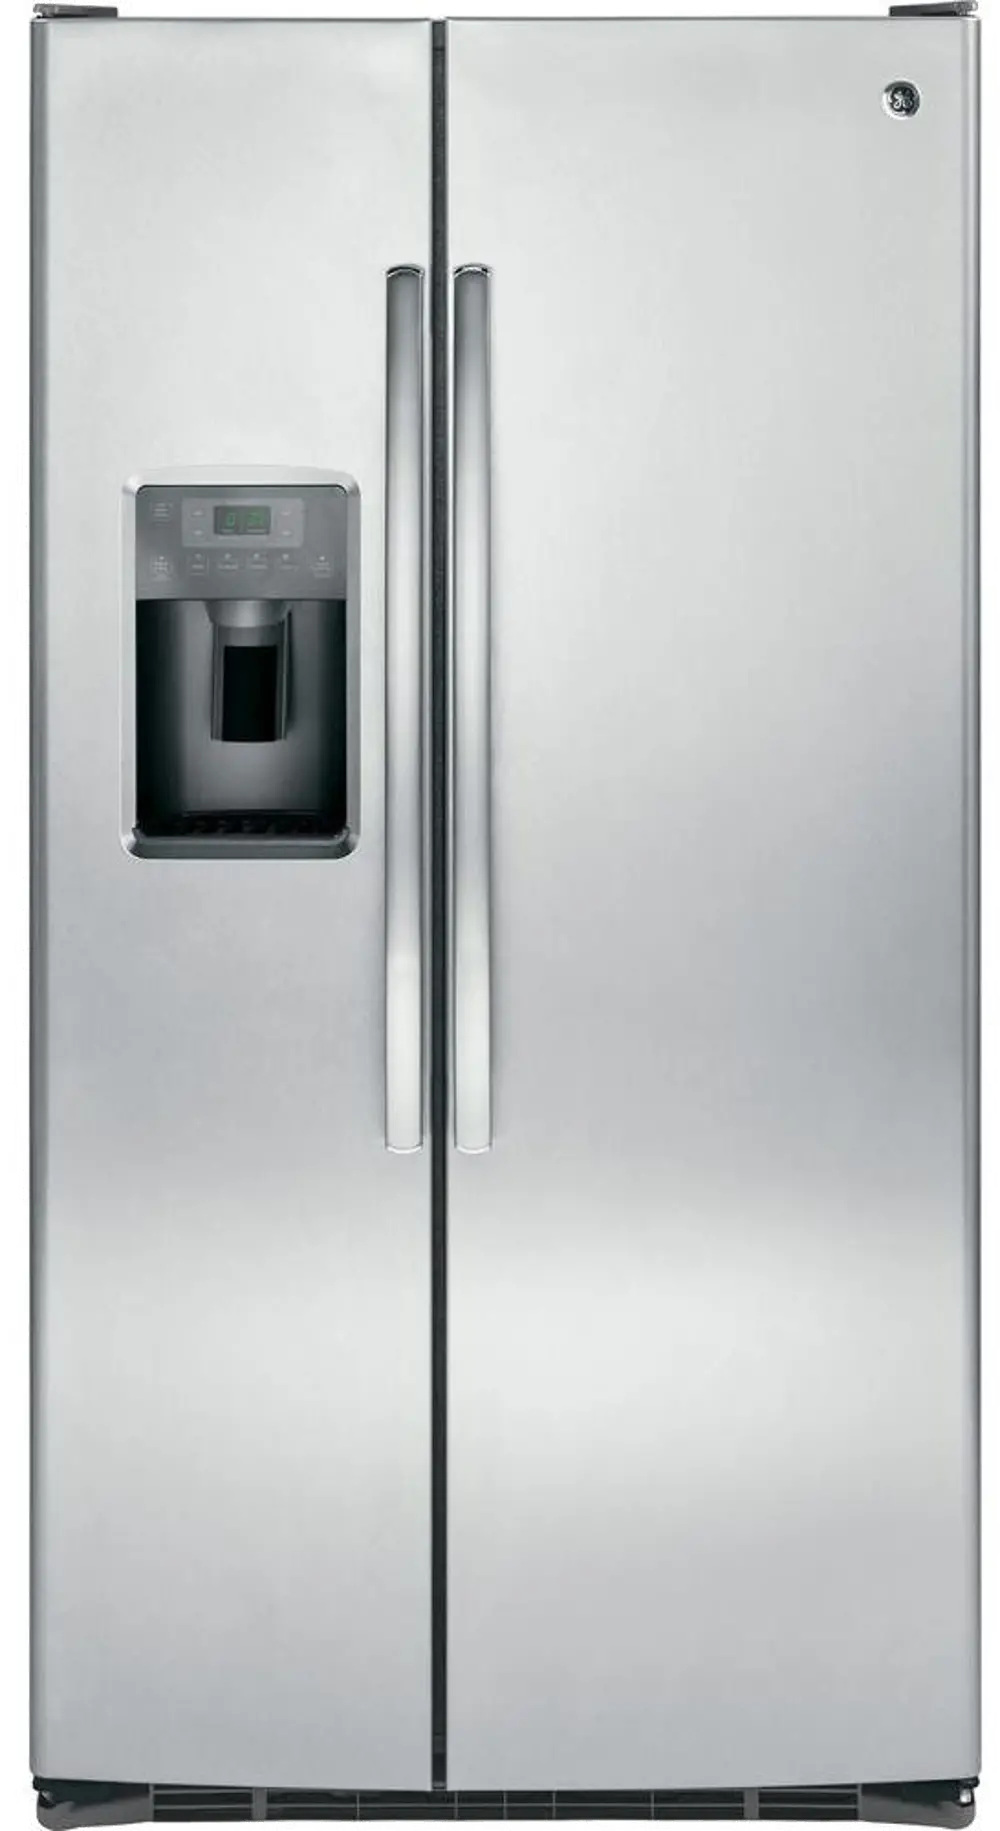 GSS25GSHSS GE 25.3 cu ft Side by Side Refrigerator - Stainless Steel-1